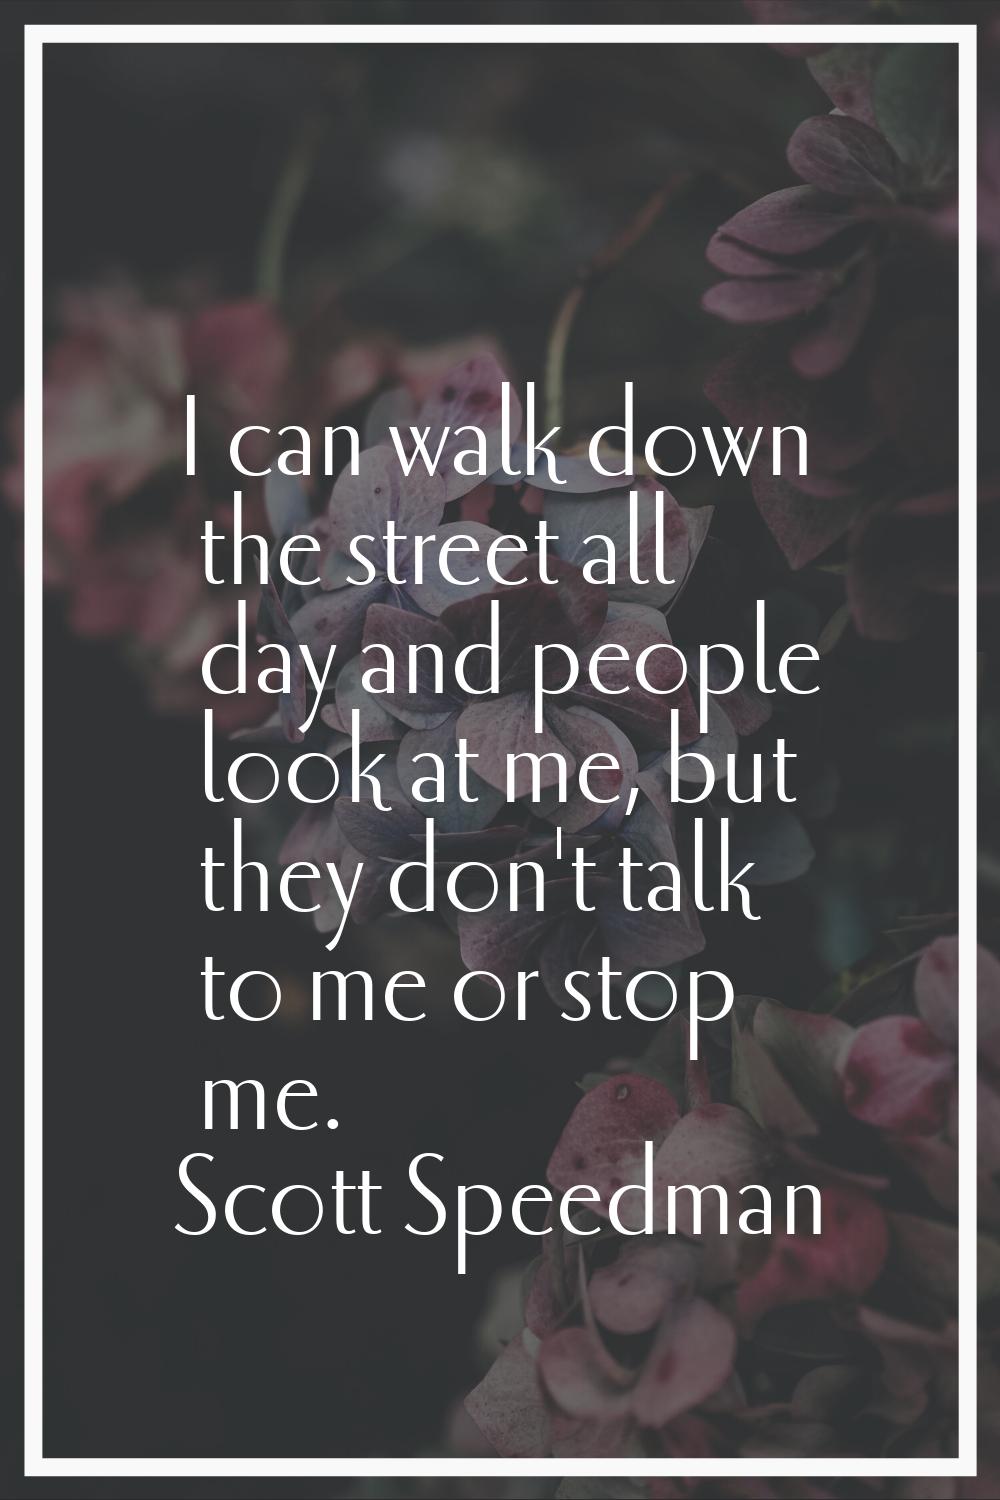 I can walk down the street all day and people look at me, but they don't talk to me or stop me.